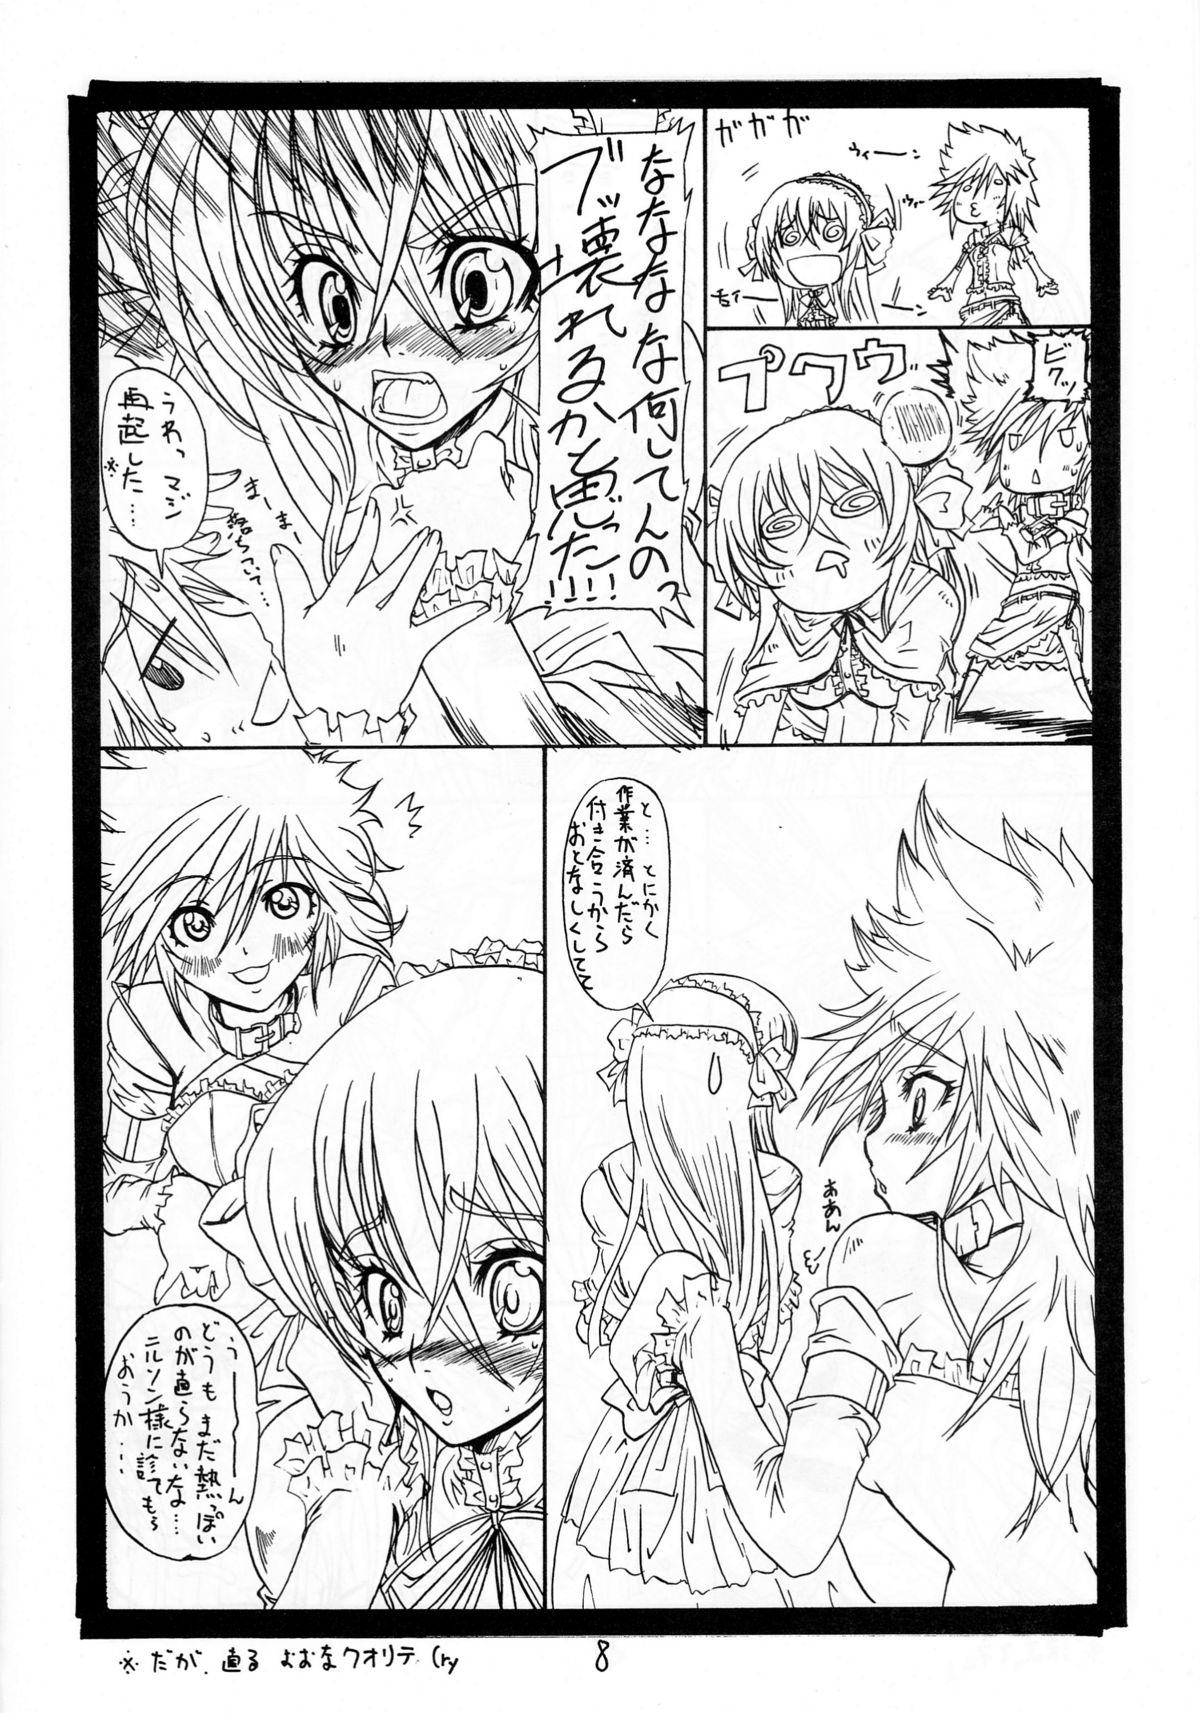 (C71) [S-G.H. (Oona Mitsutoshi)] SUICIDA DESESPERACION (Coyote Ragtime Show) page 8 full